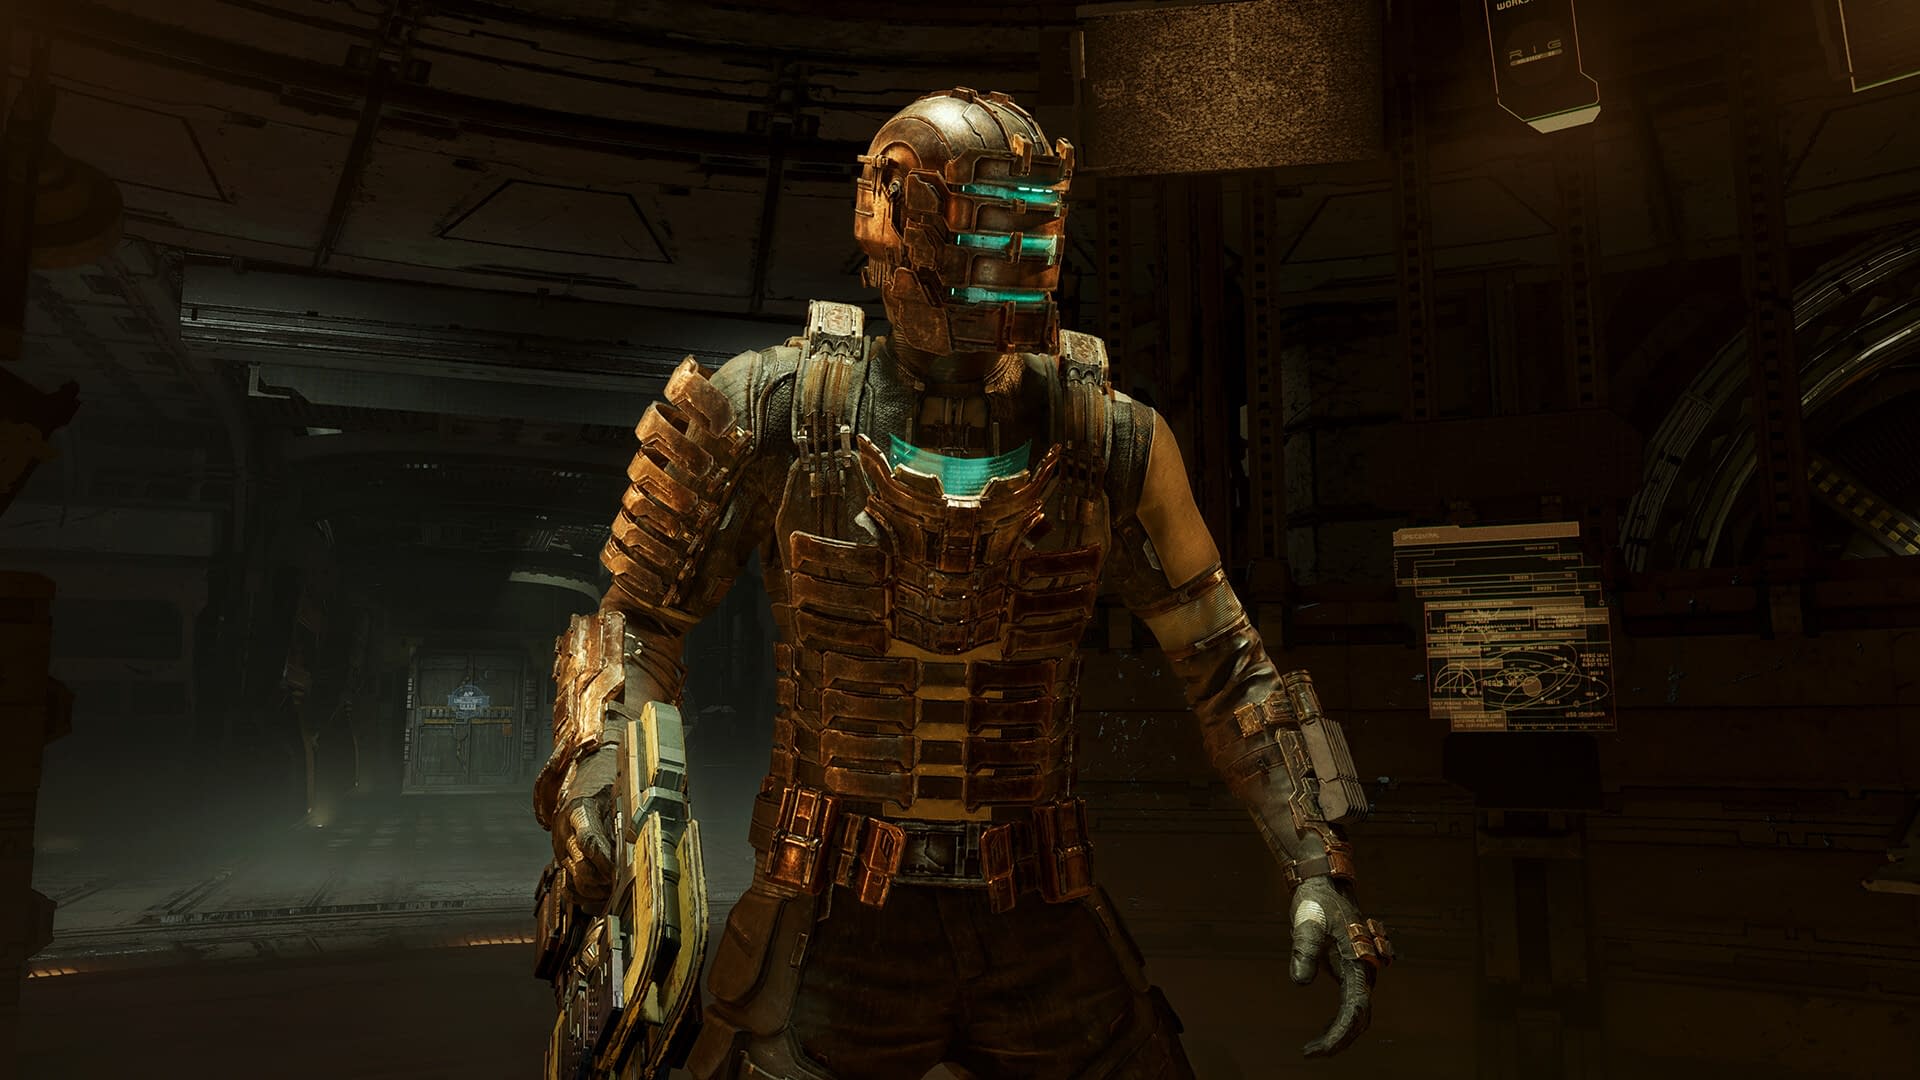 Released Fragman for Dead Space Remake Published